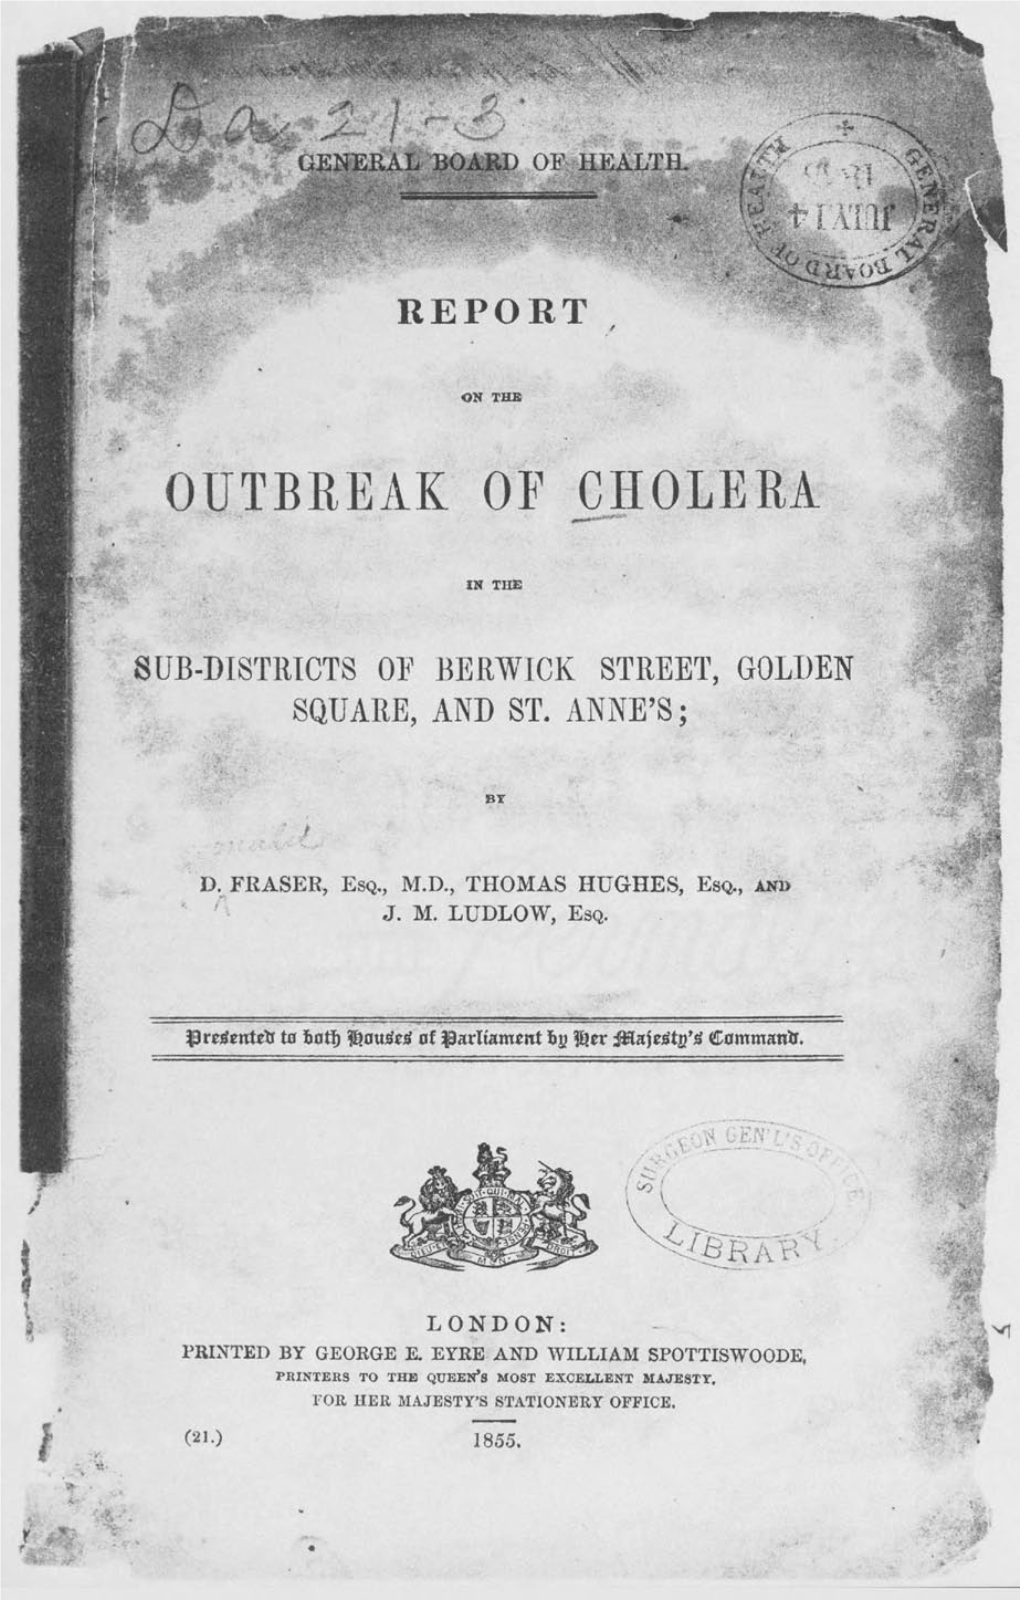 Report of the Outbreak of Cholera in the Sub-Districts of Berwick Street